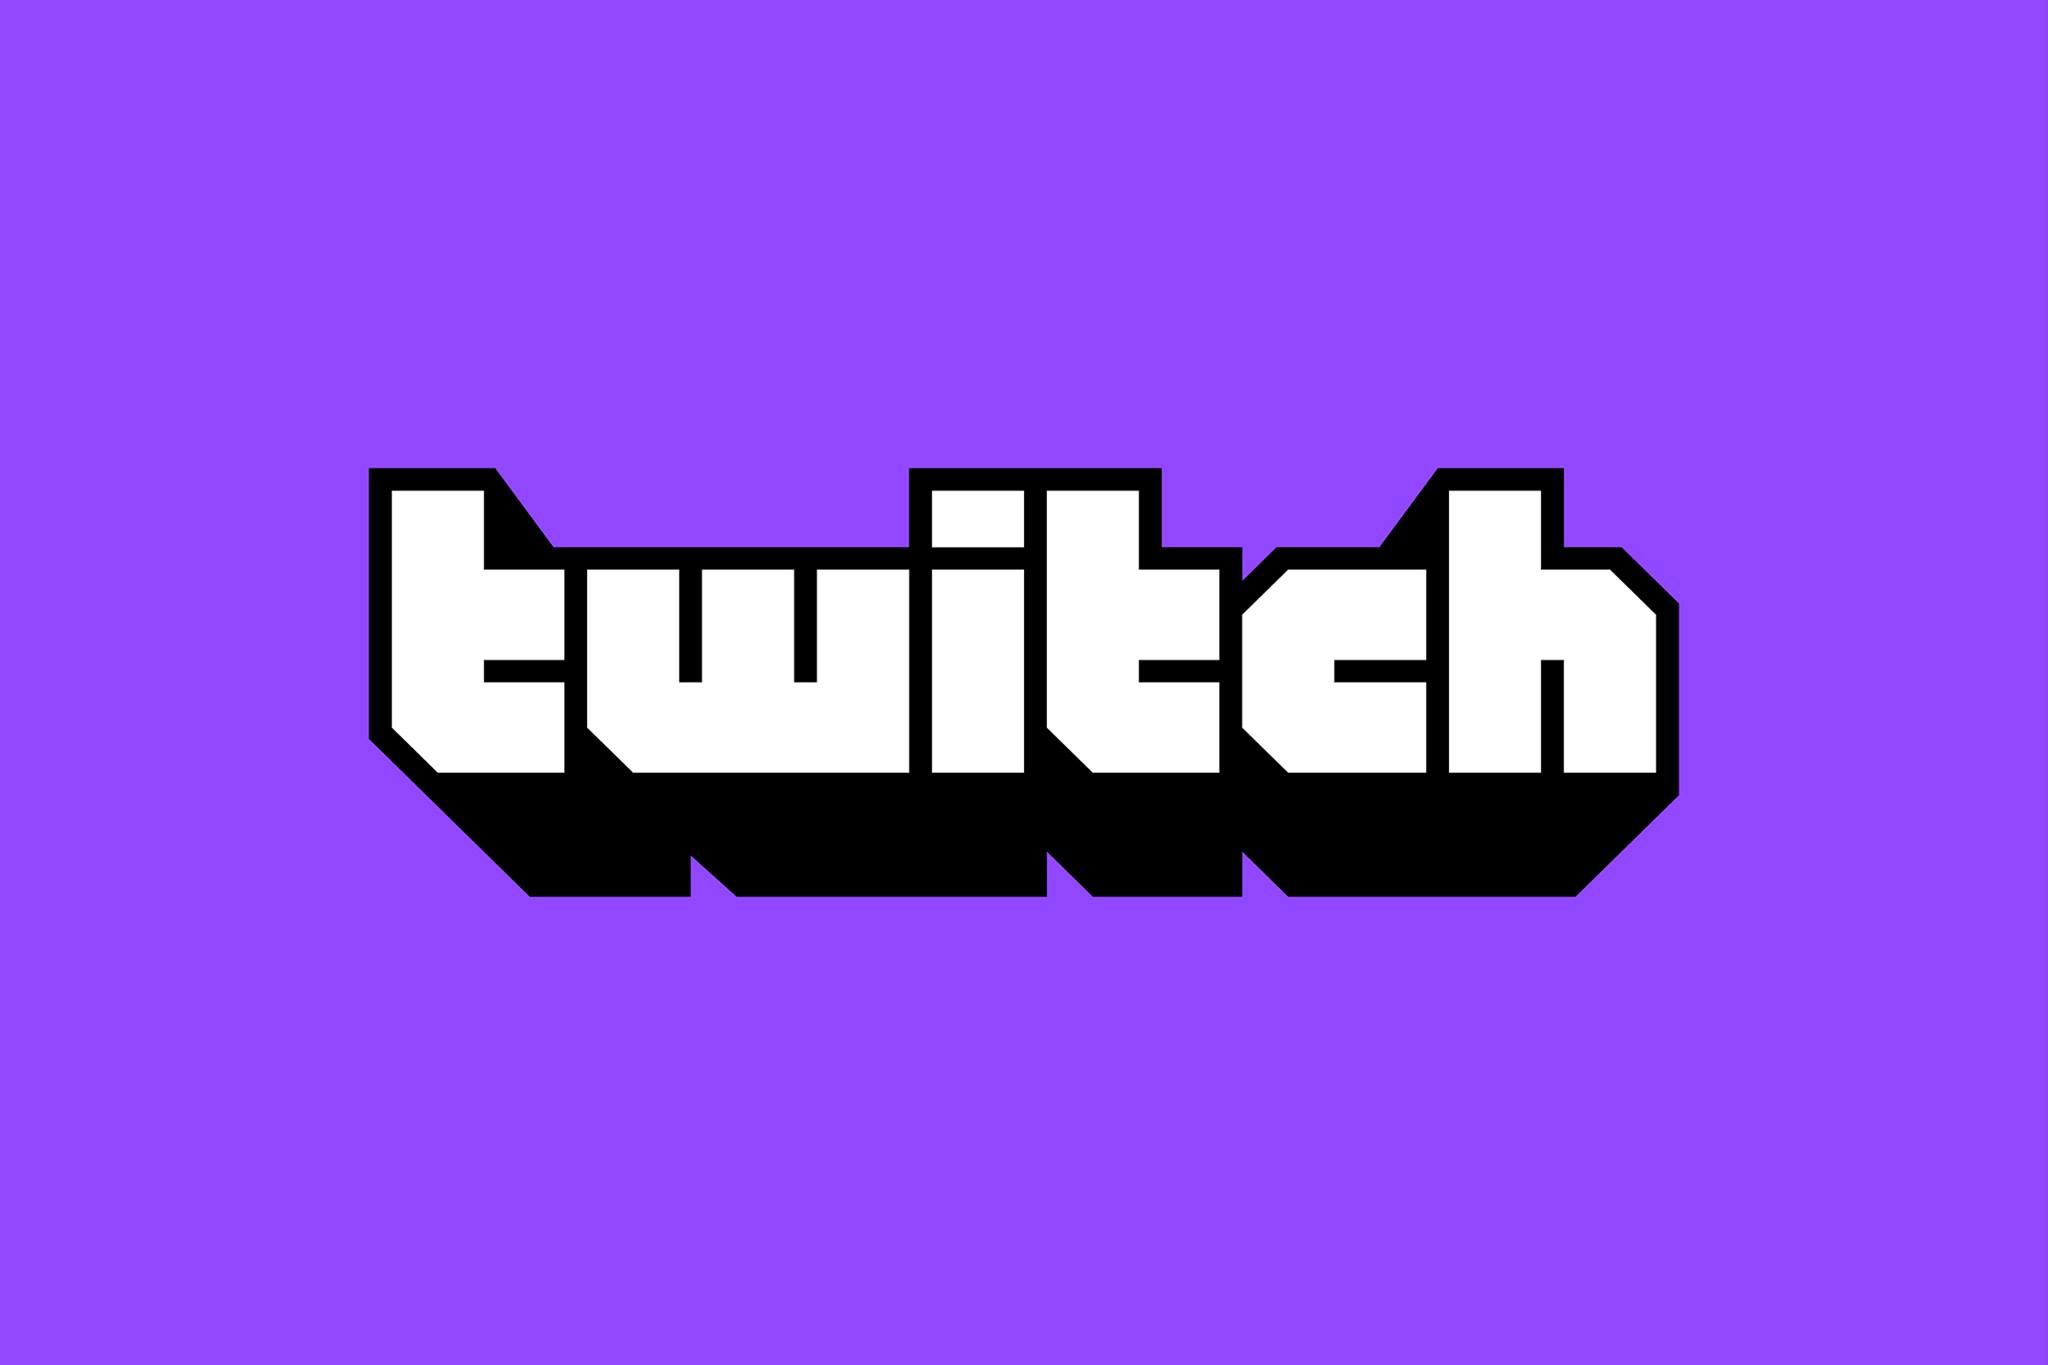 Join us on twitch for some PC building and Gaming!